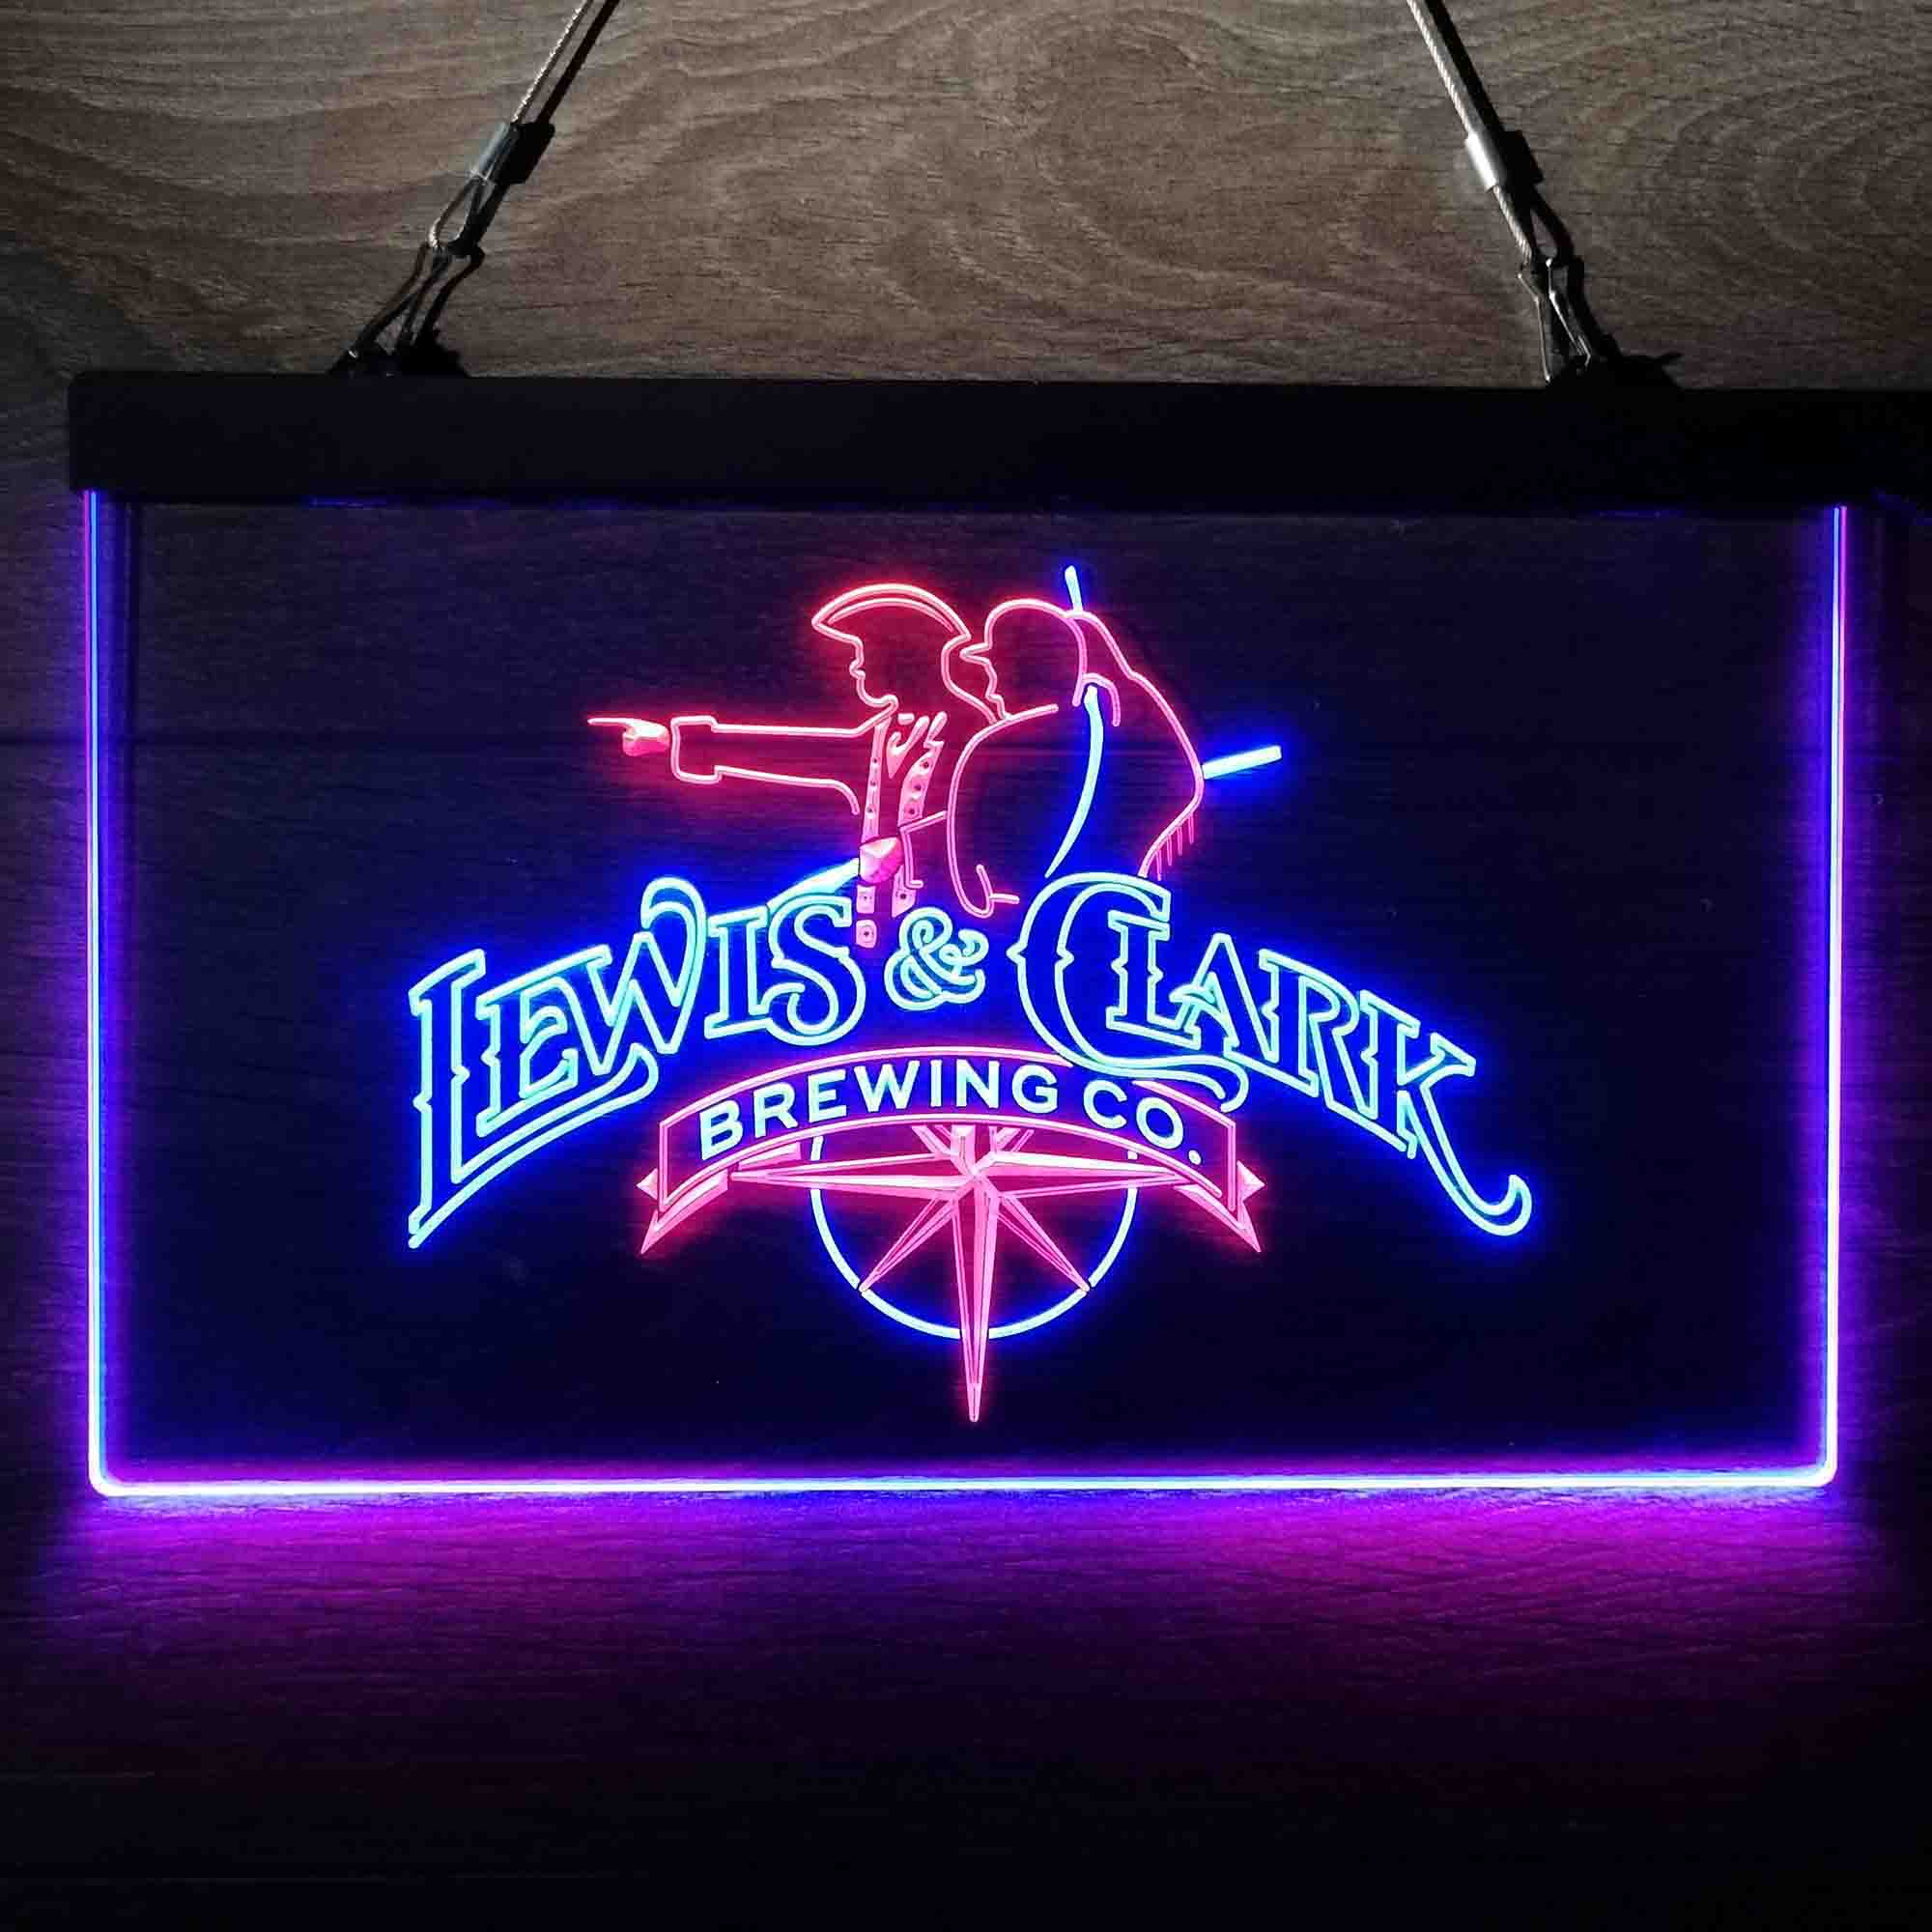 Lewis & Clark Brewing Co. Neon-Like LED Sign